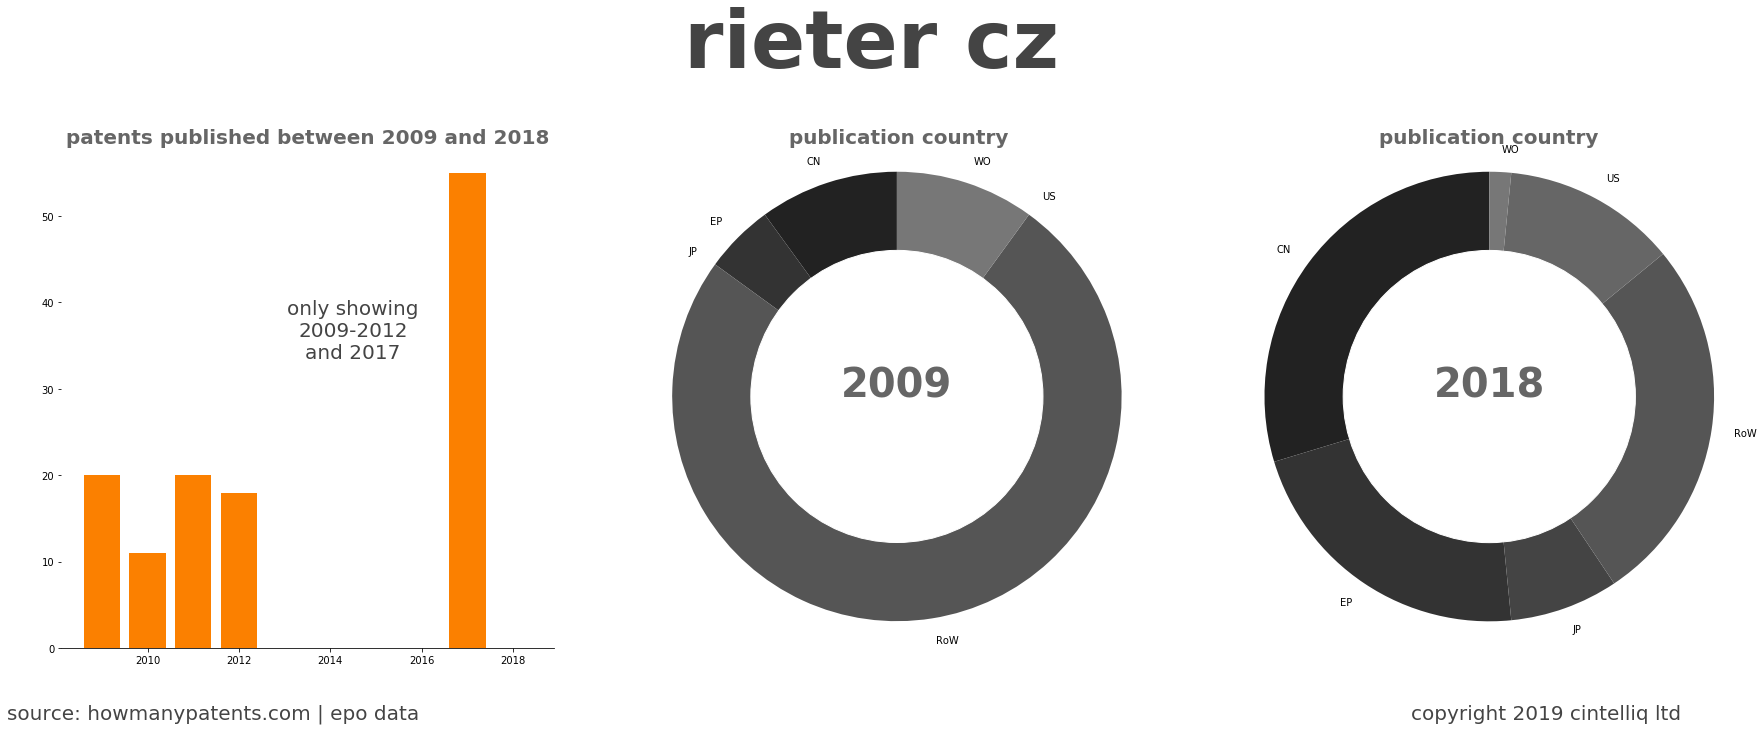 summary of patents for Rieter Cz